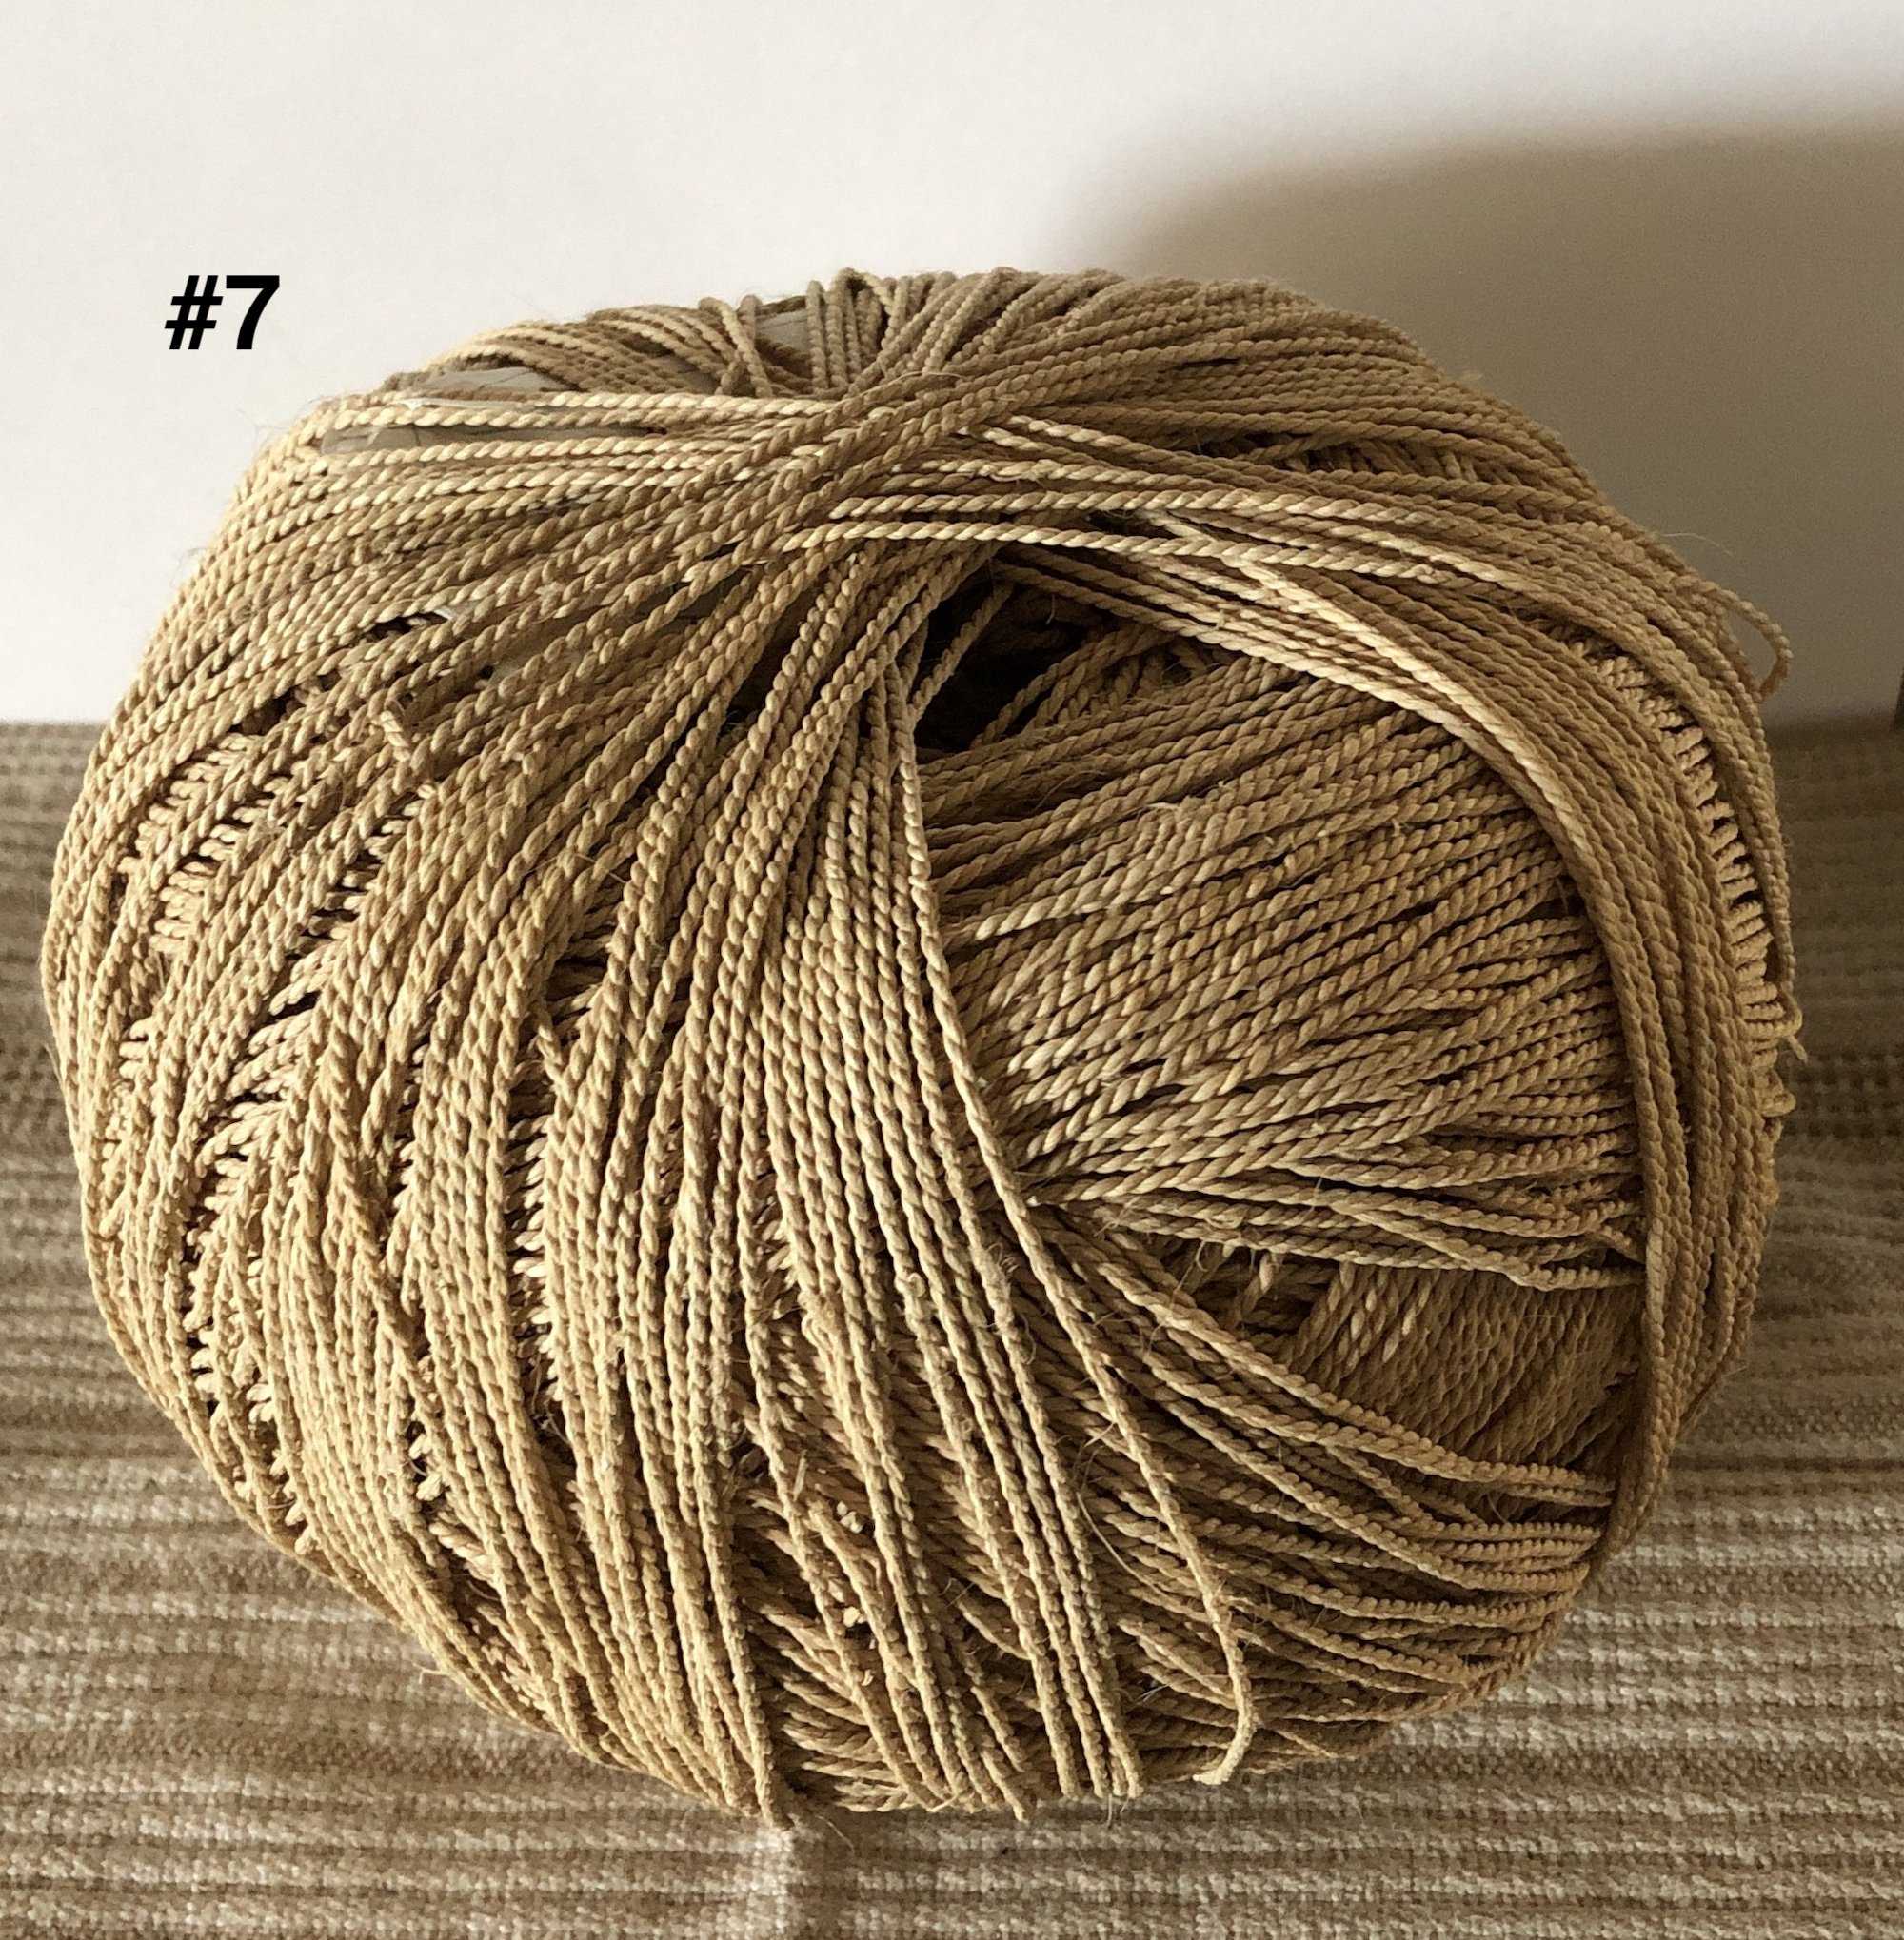 Natural Jute Twine by Ashland in Brown | 500 | Michaels